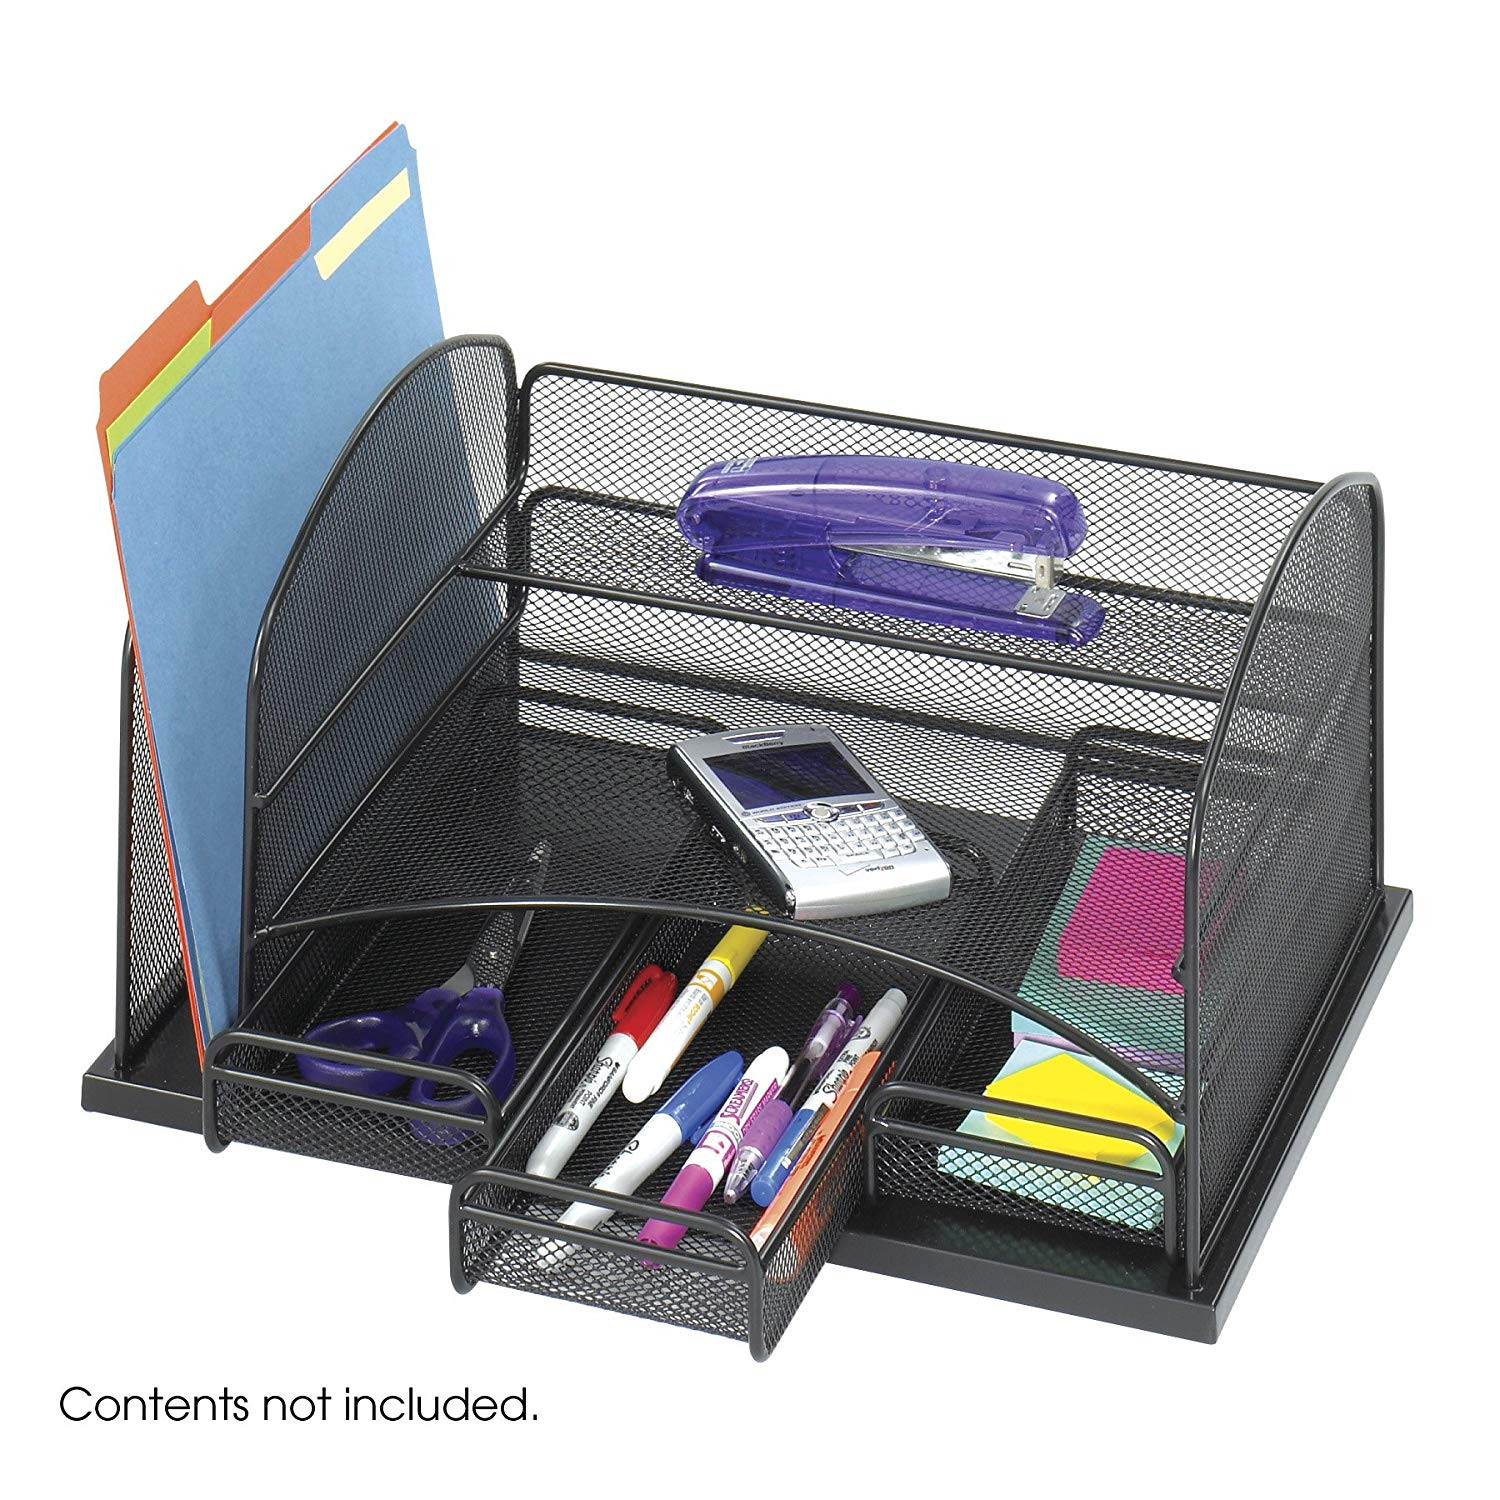 Desk Organization Supplies
 Safco Products yx Mesh Desk Organizer with 3 Drawers